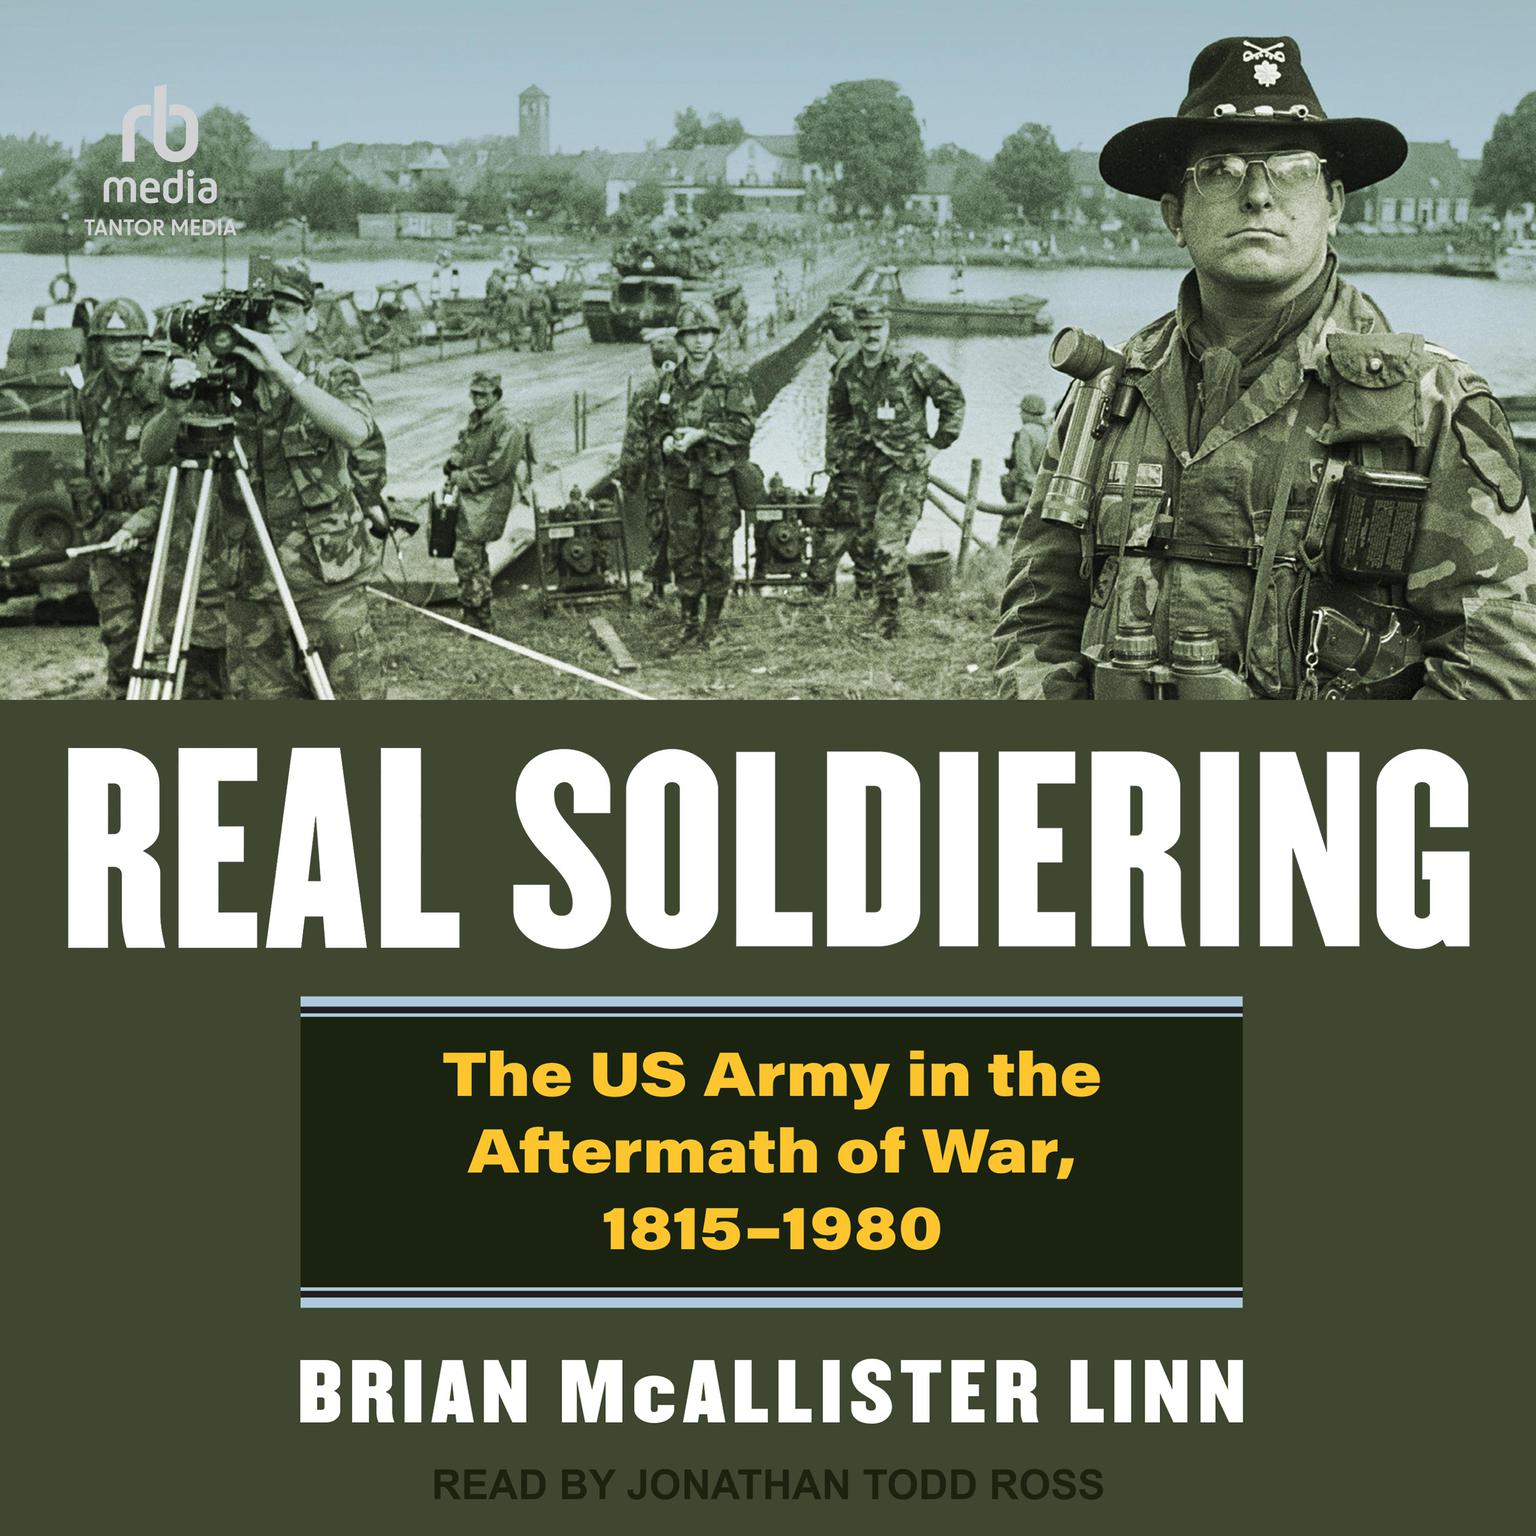 Real Soldiering: The US Army in the Aftermath of War, 1815-1980 Audiobook, by Brian McAllister Linn